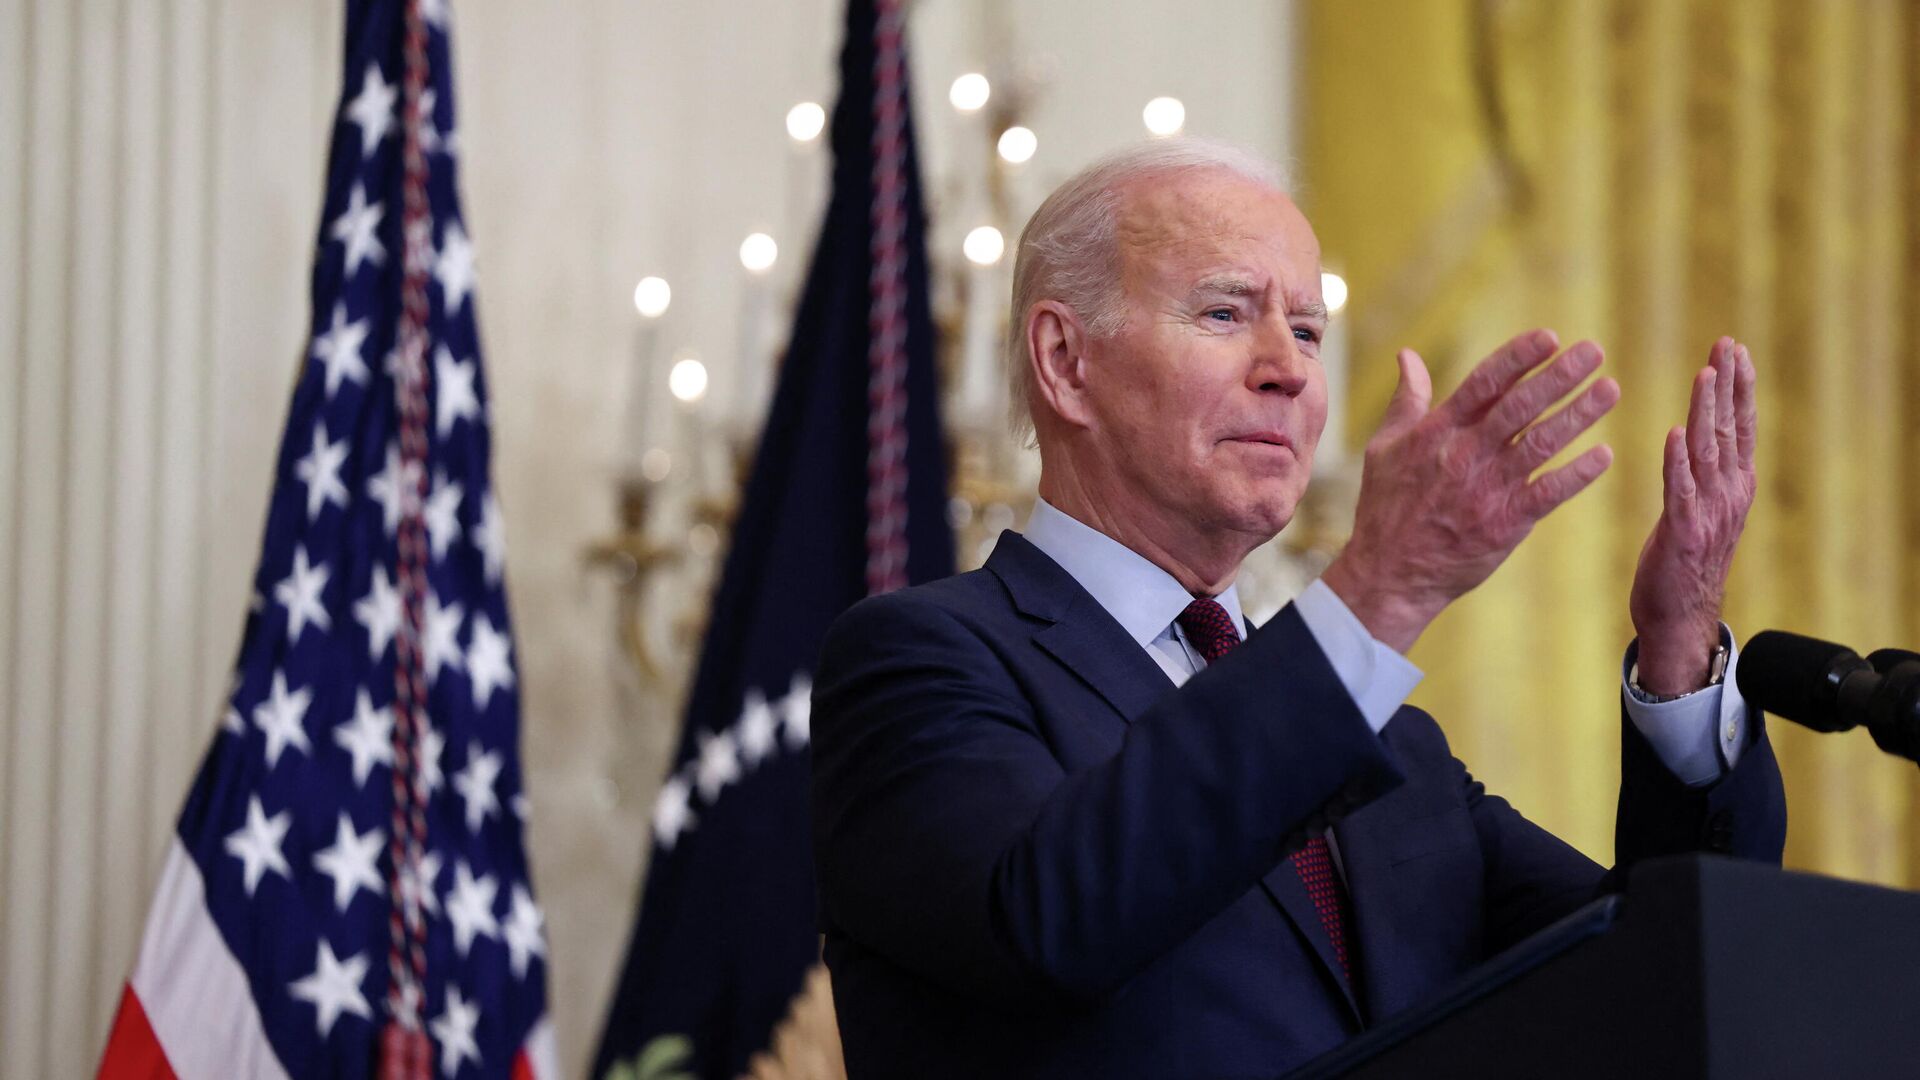 U.S. President Joe Biden speaks before signing into law the Ending Forced Arbitration of Sexual Assault and Sexual Harassment Act of 2021, at the White House in Washington, U.S., March 3, 2022 - Sputnik International, 1920, 30.03.2022